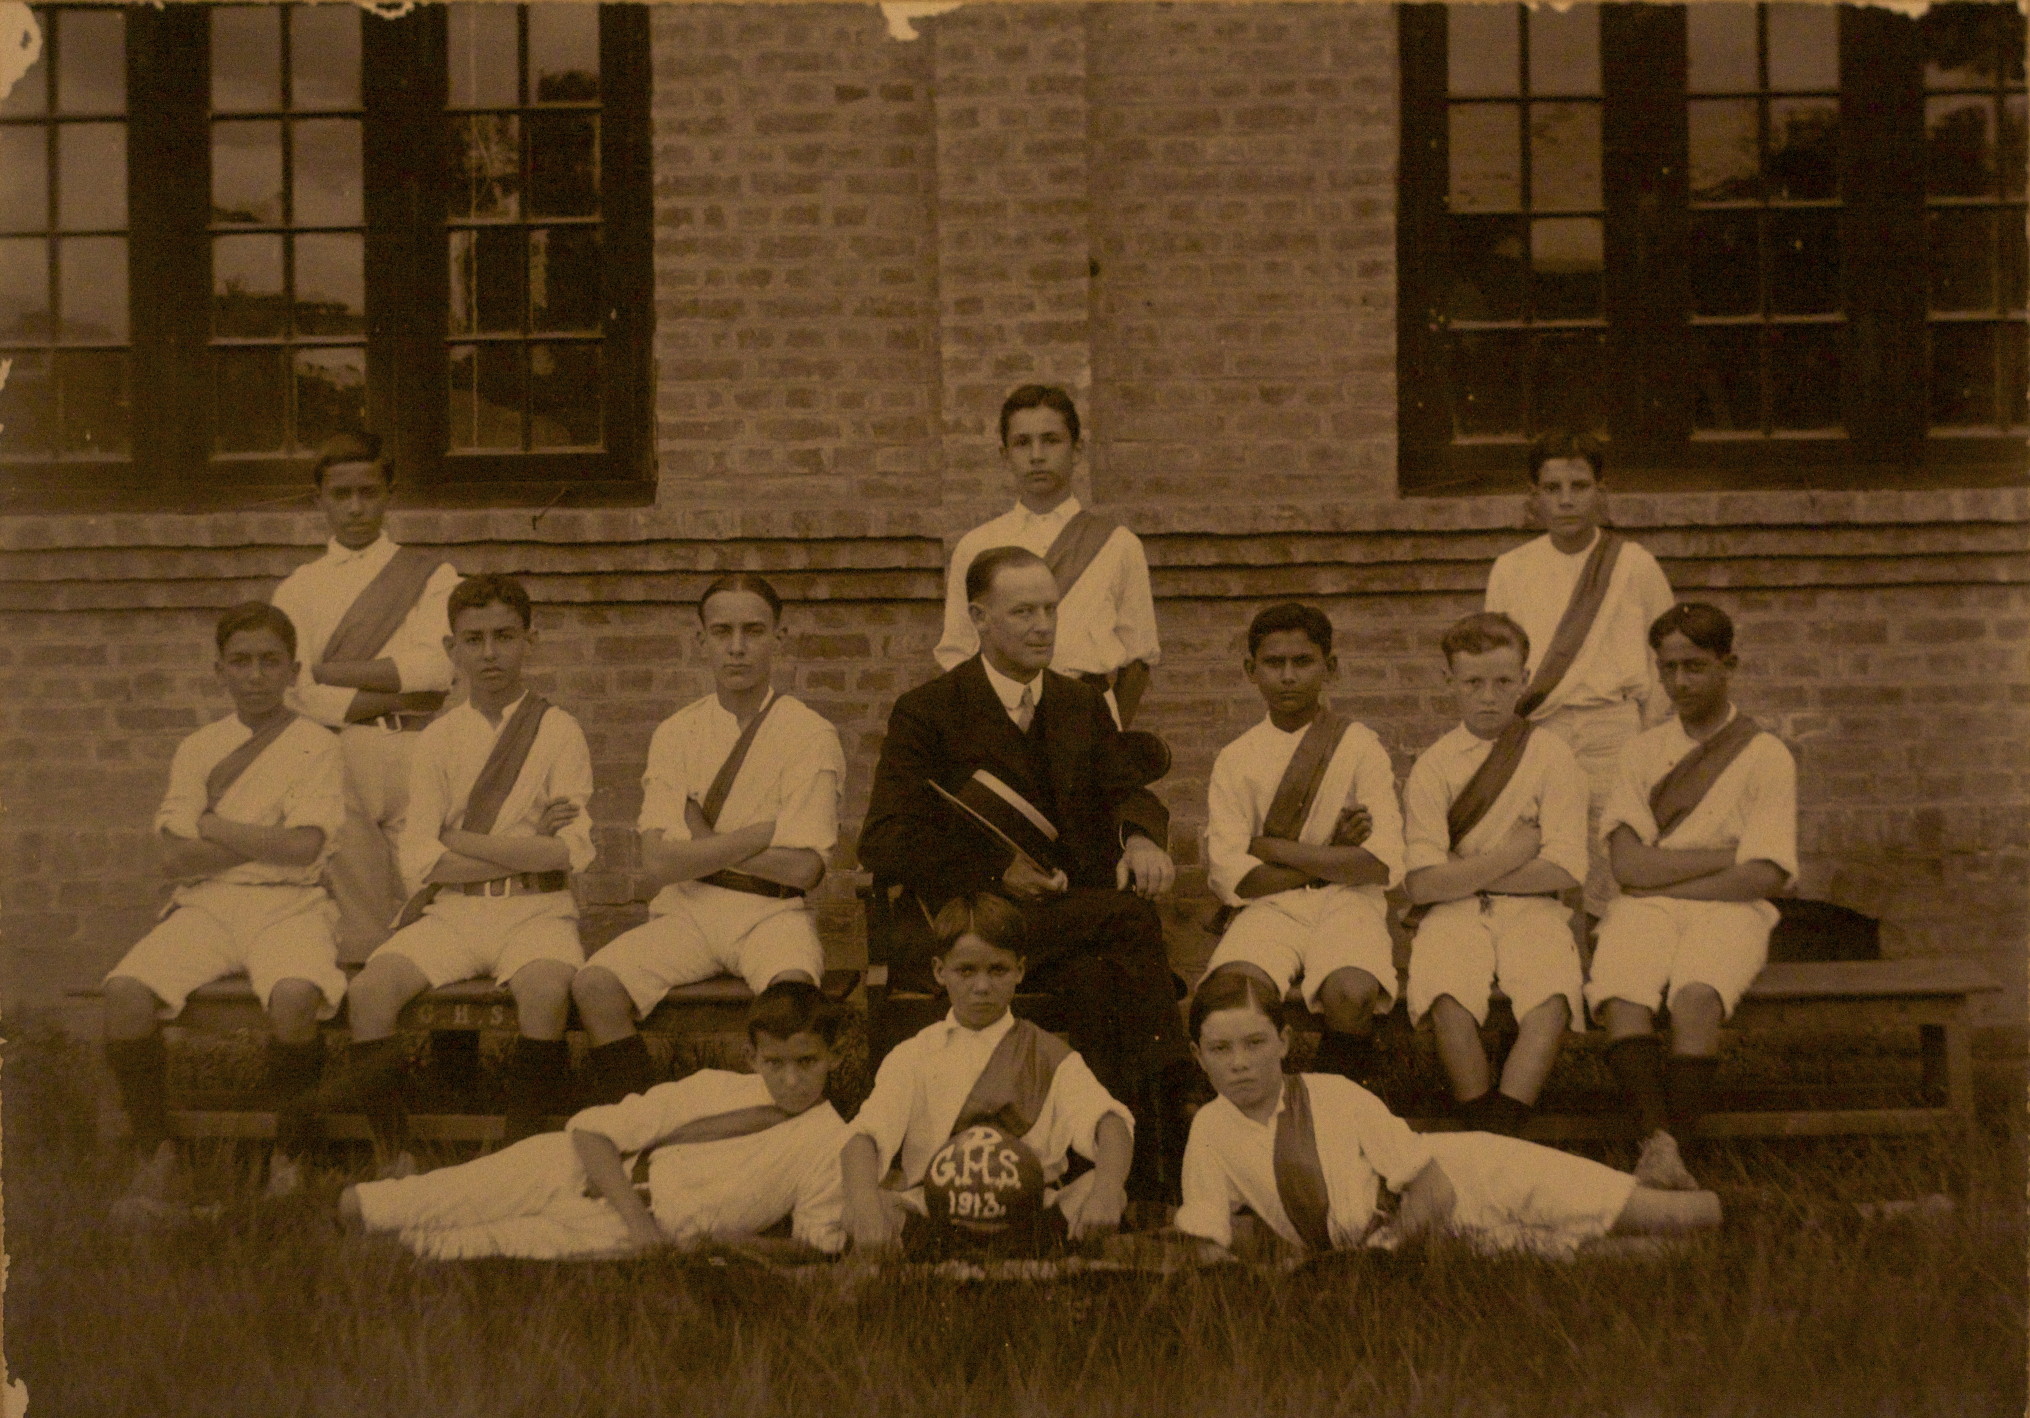 sepia photo\' showing twelve boys in white shirts and shorts with diagonal, coloured sashes across their chests, and a teacher in a dark suit and holding a straw hat, arranged in front of a brick wall with three boys standing at the back, six in front of them sitting on a bench with the teacher at the centre, one sitting upright on the grass holding a football and one either side of him sprawled on the grass